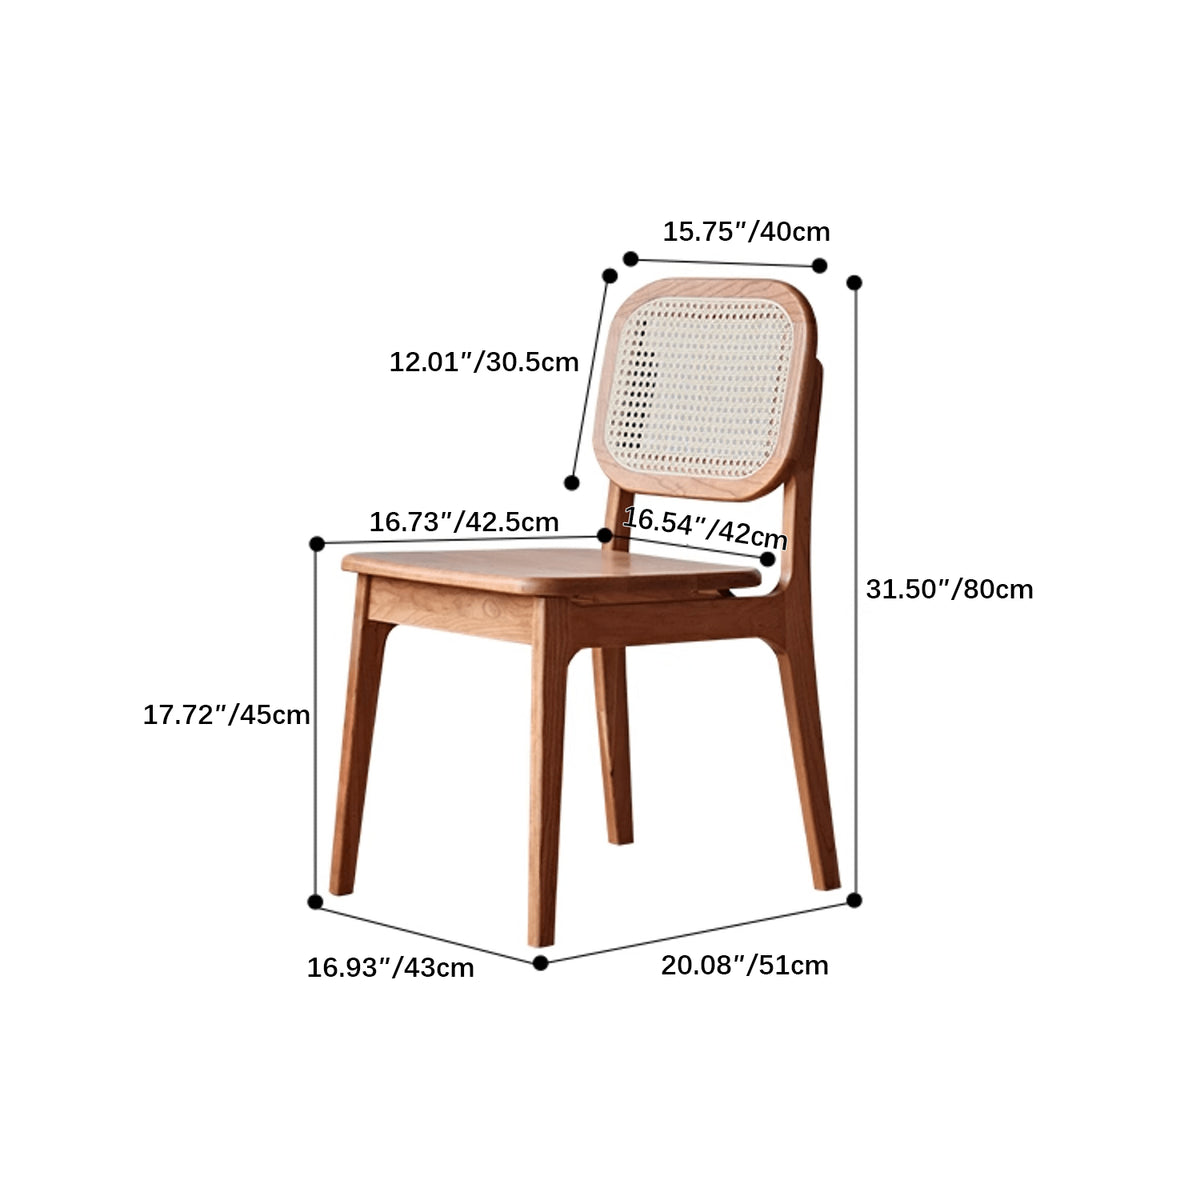 Elegant Cherry Wood Chair with Natural Rattan Accent fyg-661